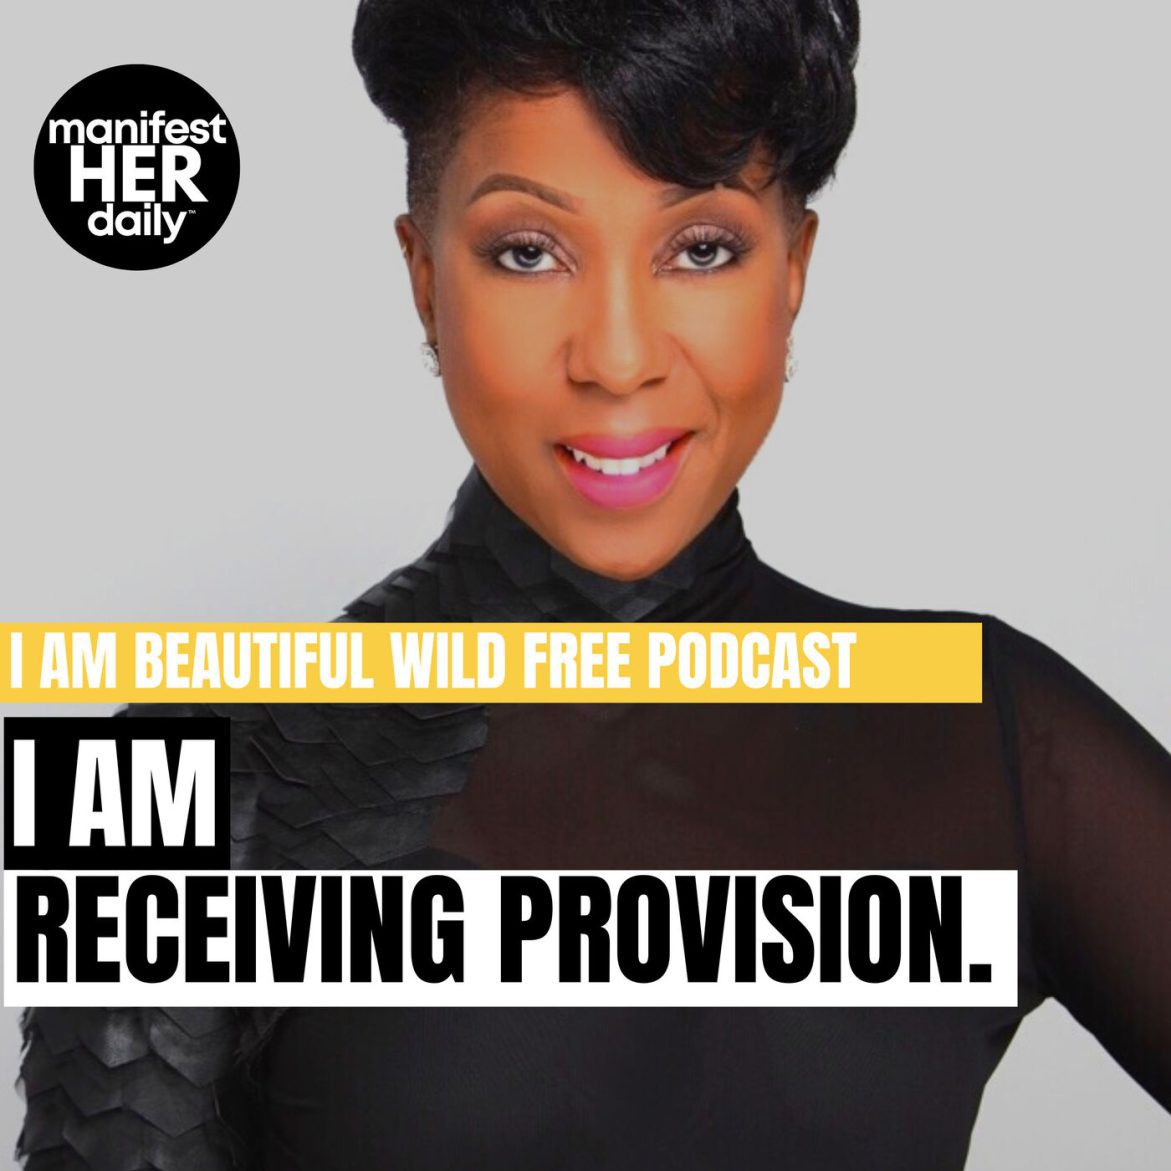 Black Podcasting - I AM RECEIVING PROVISION: A Guided Meditation Podcast with Affirmations from the Bible by BWFwoman x manifestHER Daily